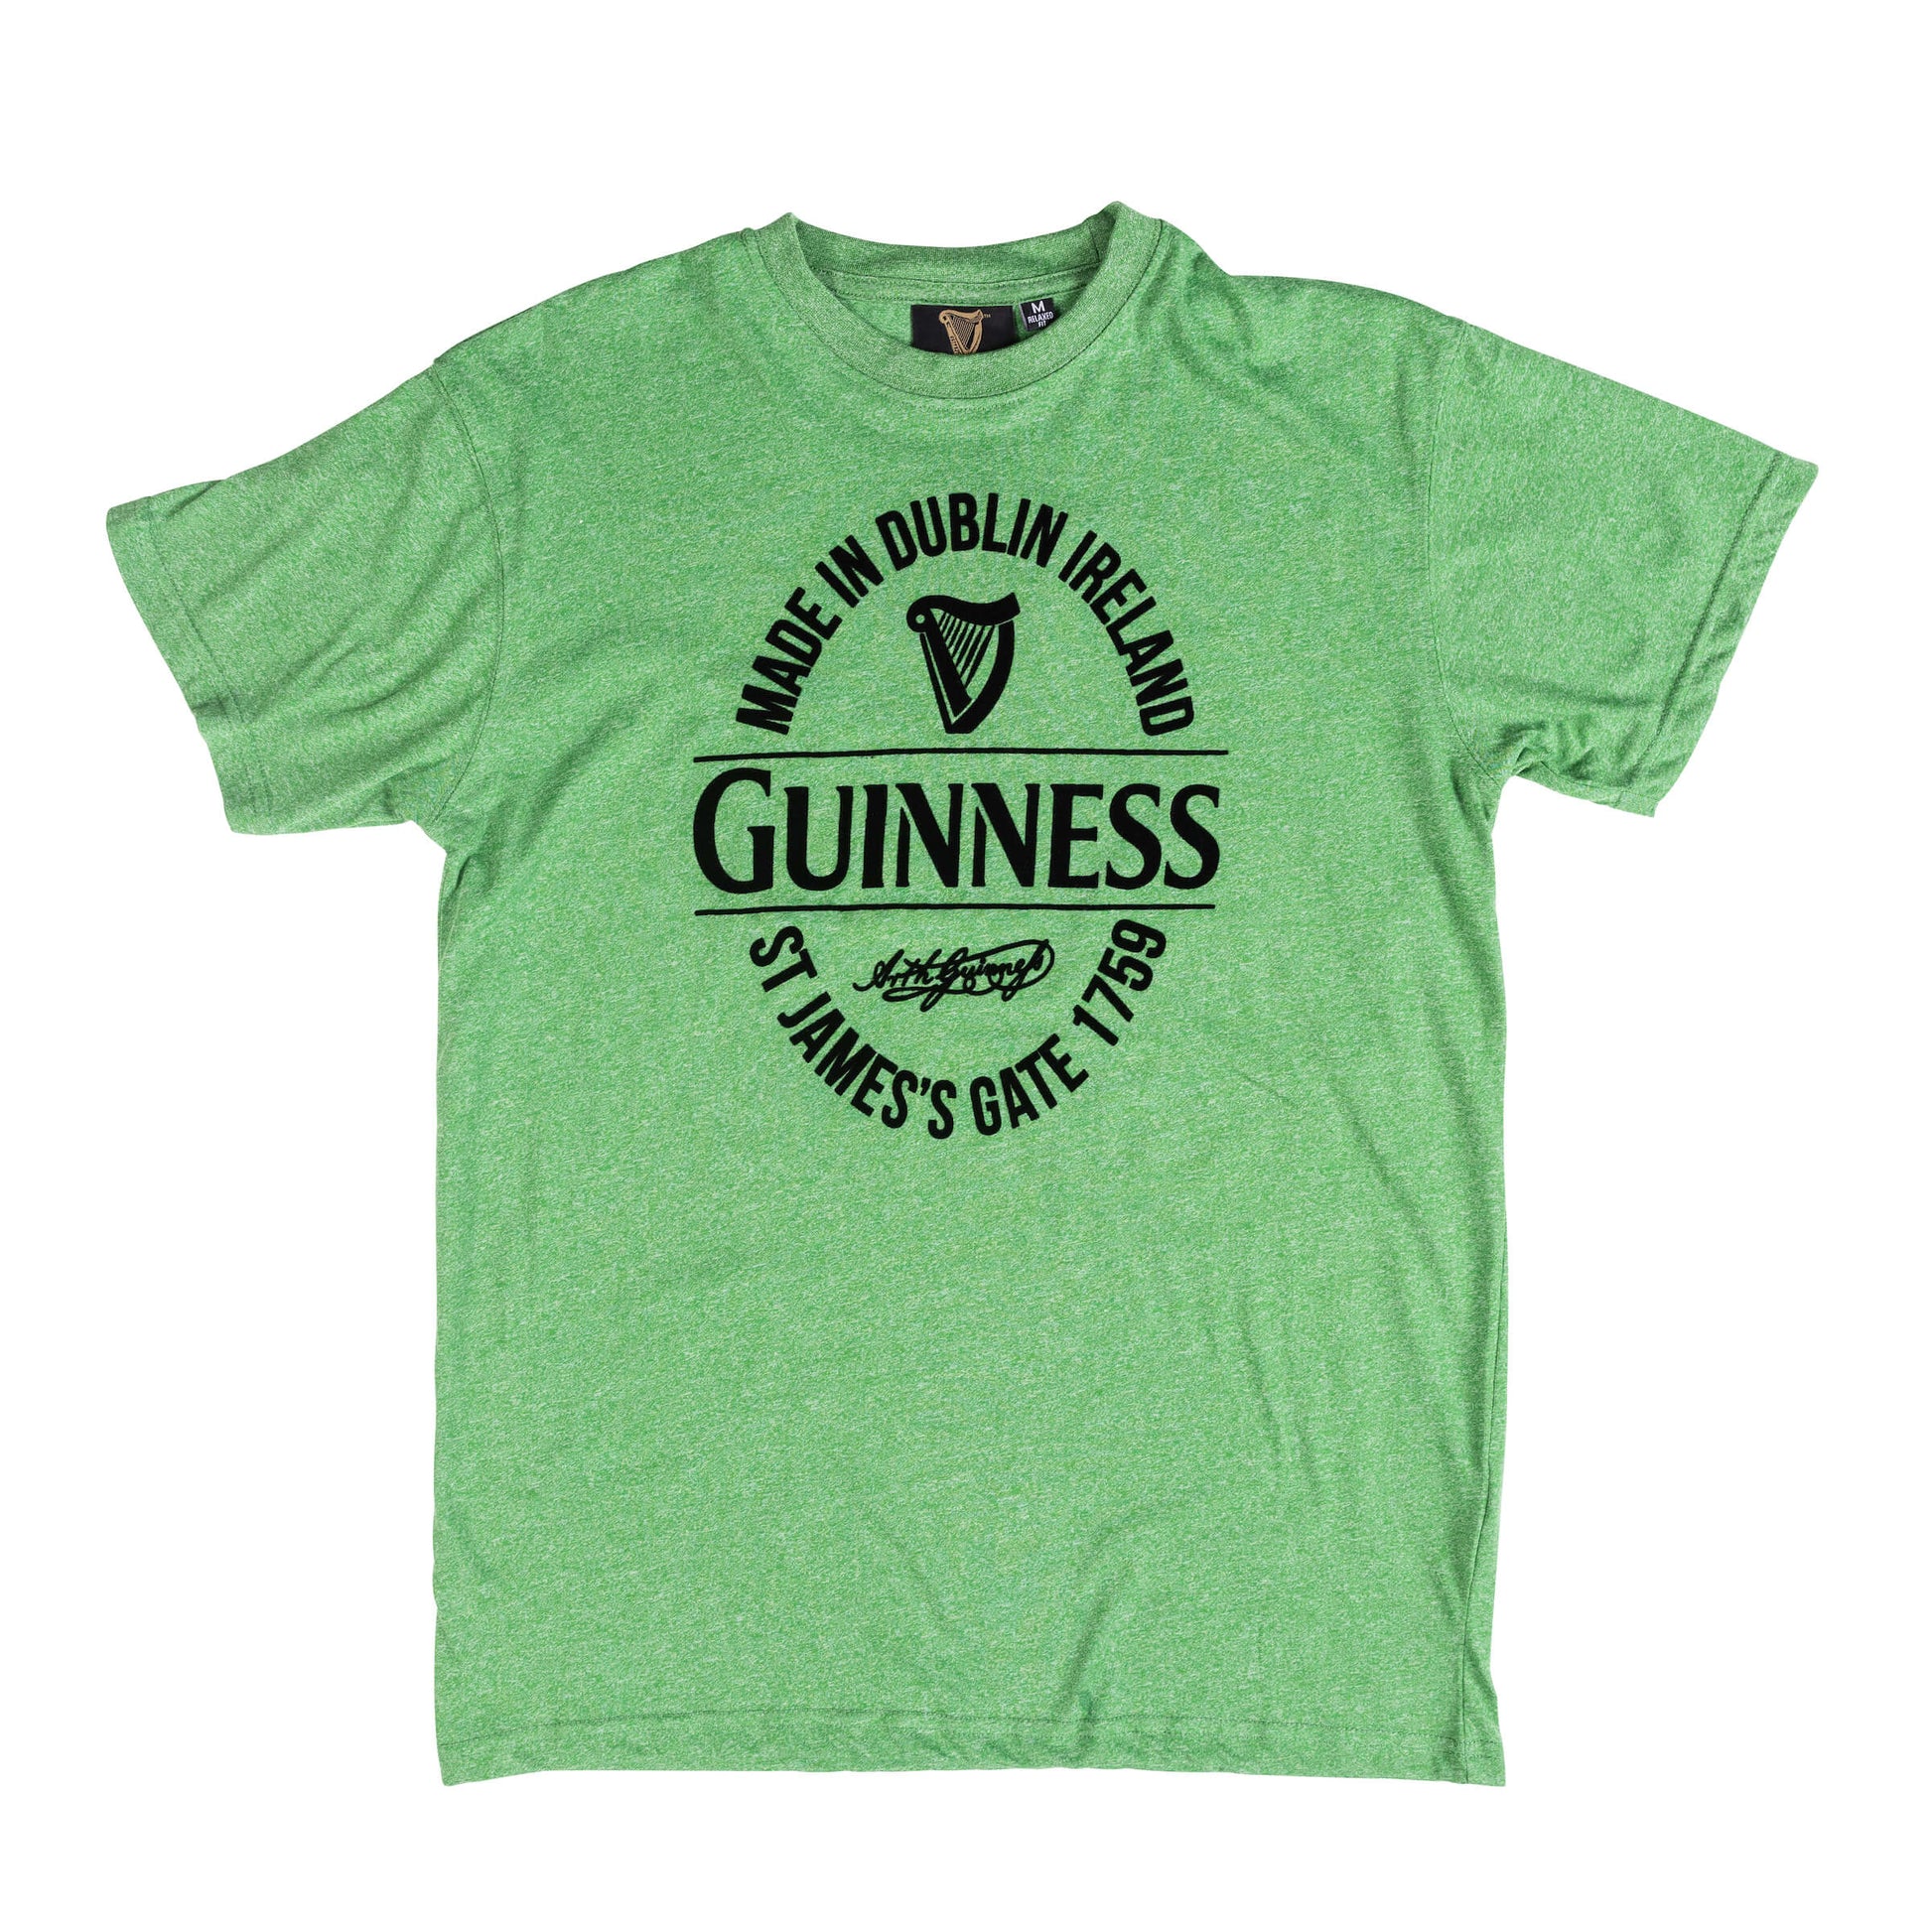 Guinness Storehouse Exclusive St. James's Gate Green T-Shirt